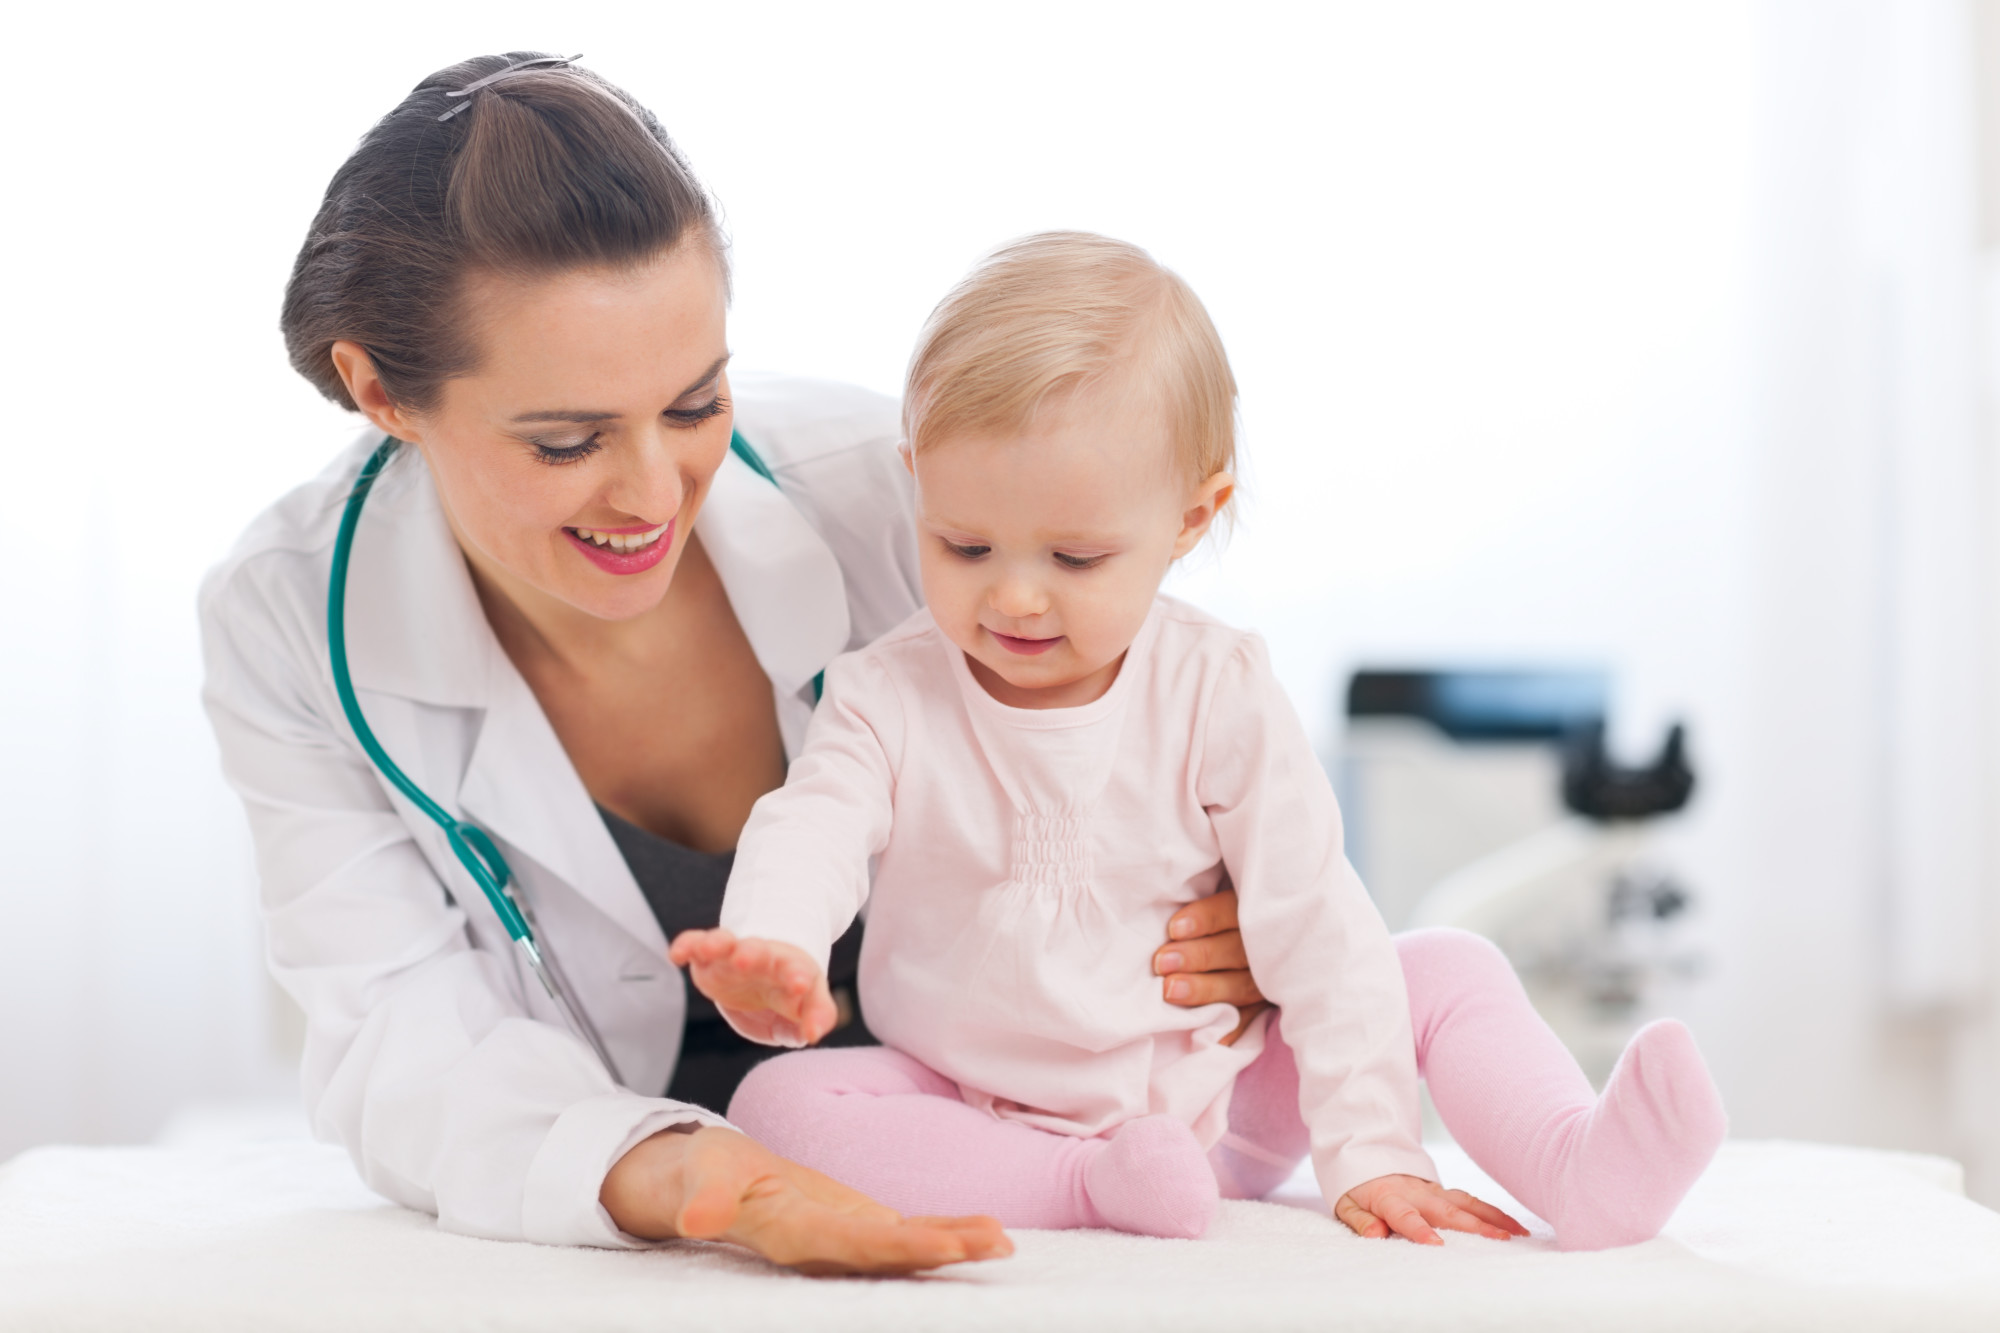 Are you for the right physical therapist for your child? Click here for five practical tips for choosing a pediatric physical therapist for your child.